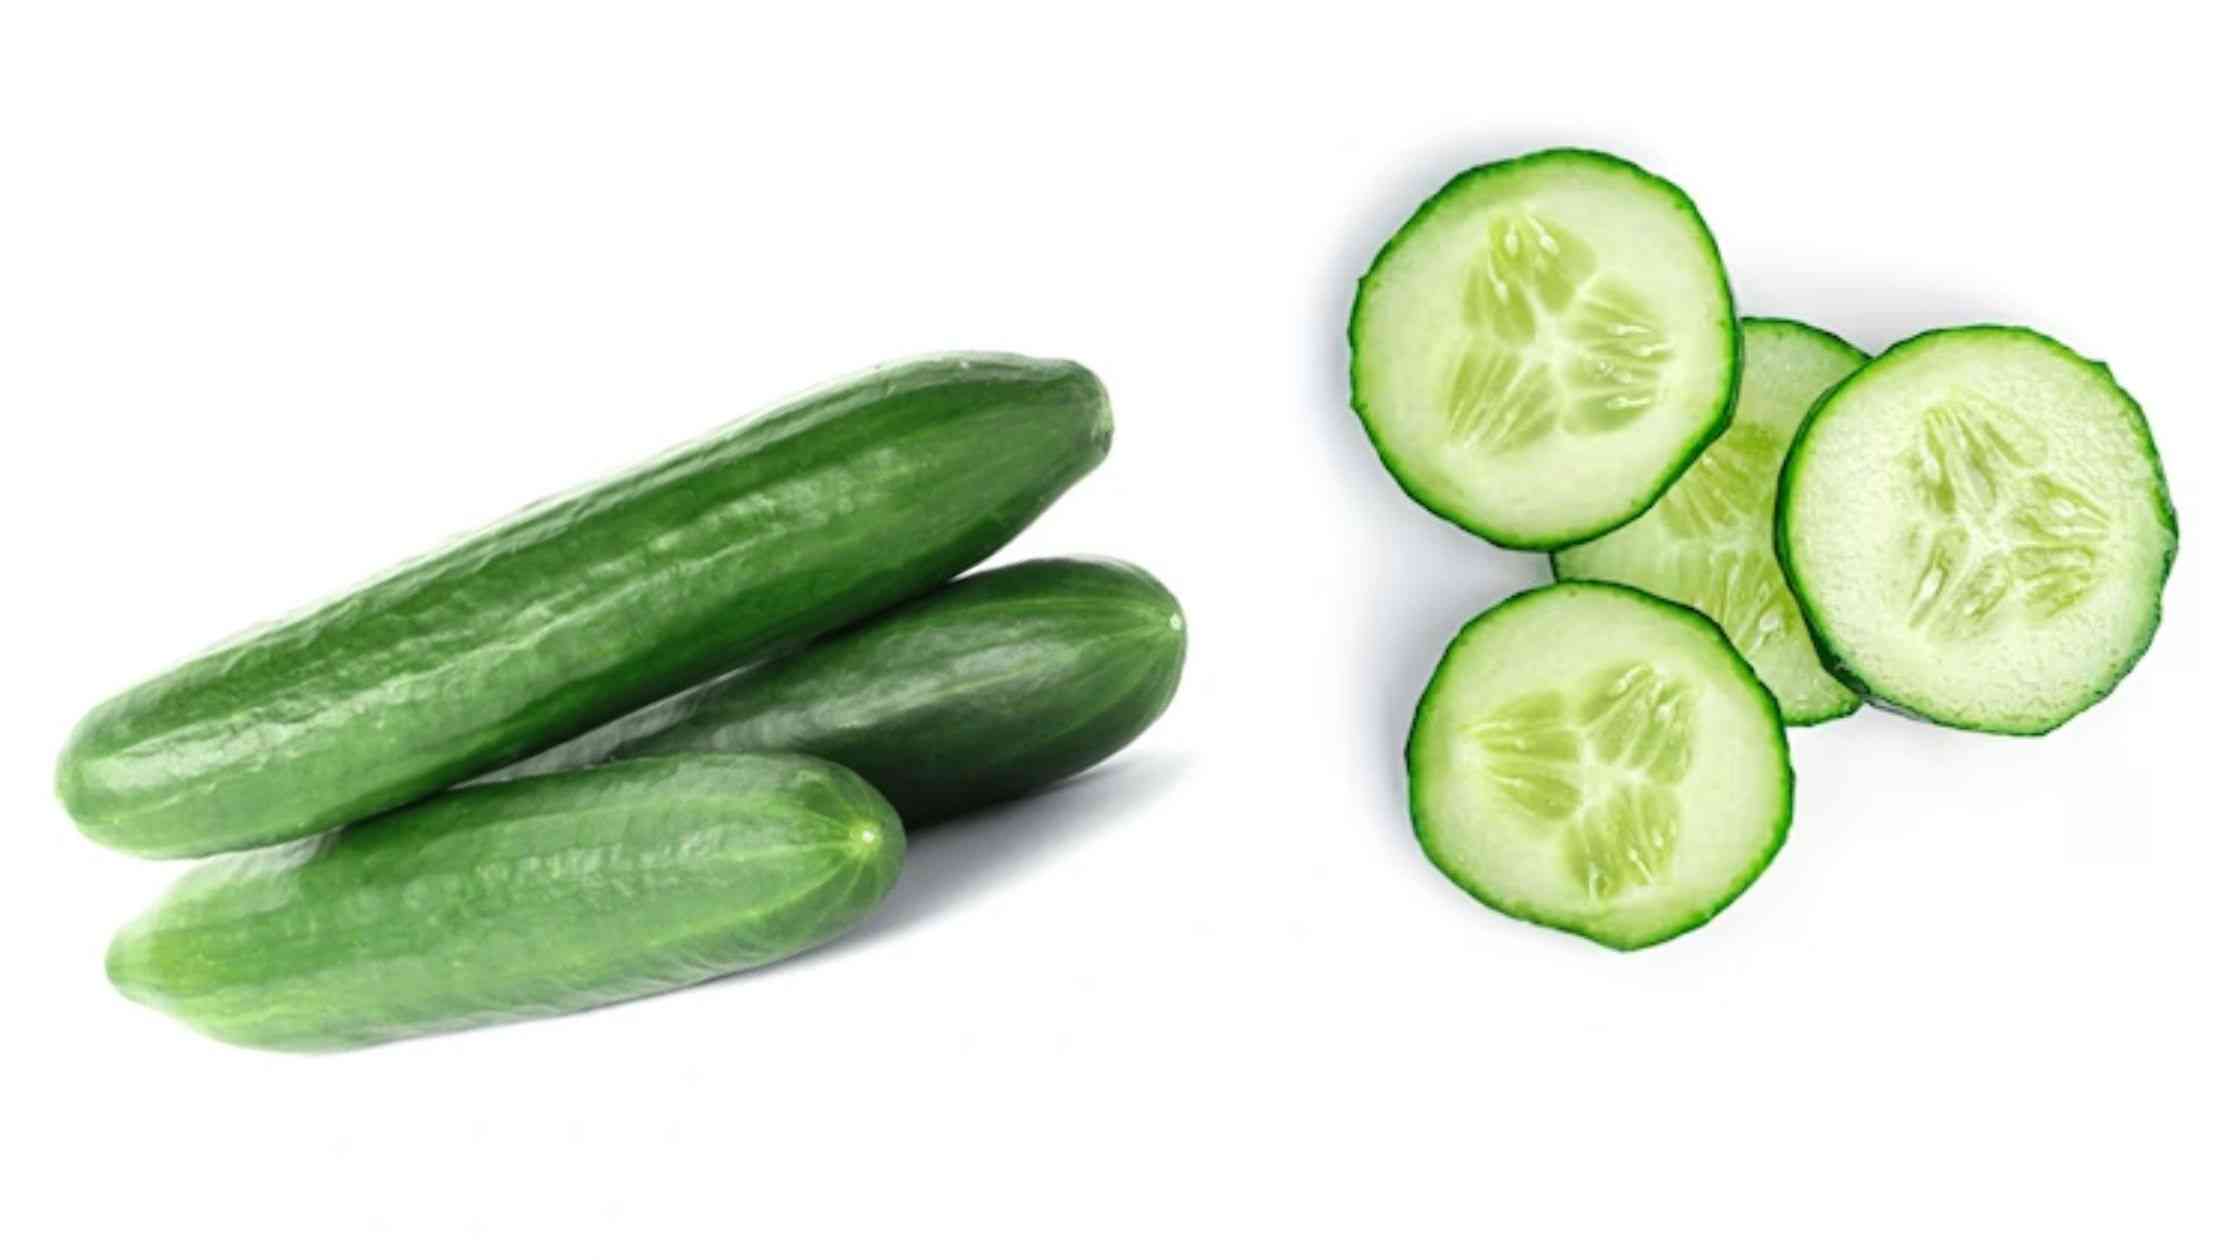 Spiritual meaning of smelling cucumbers